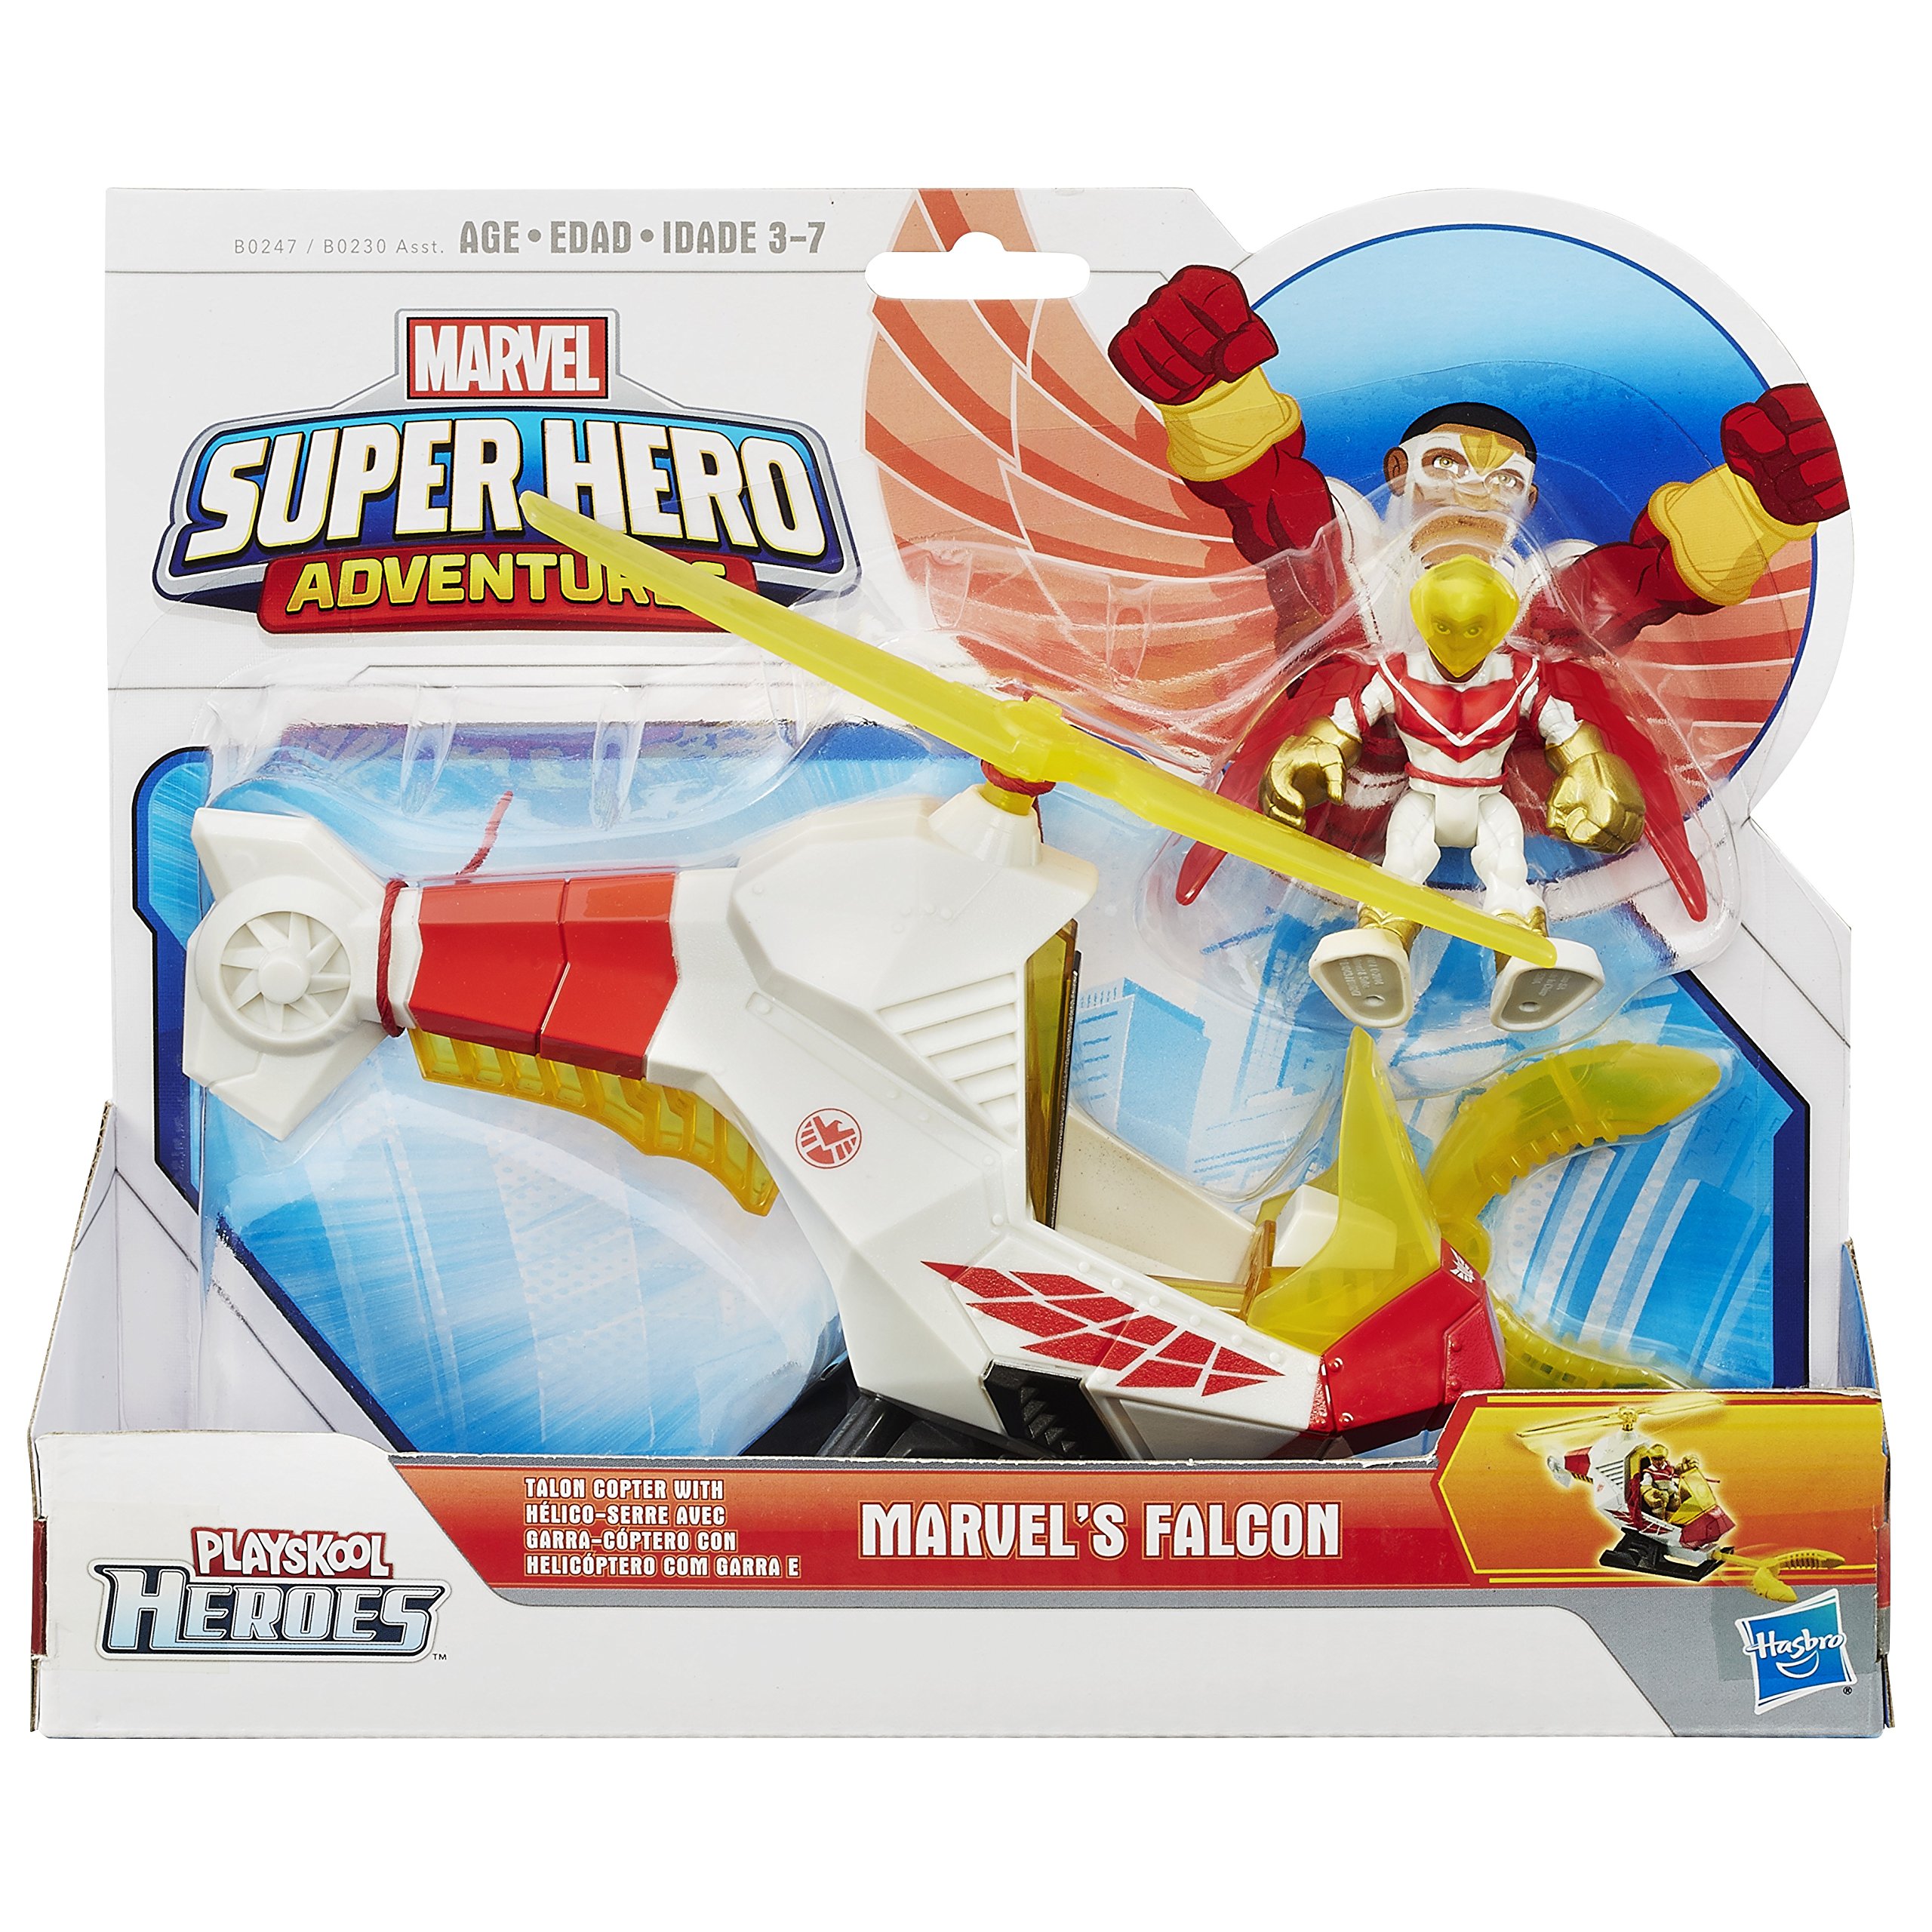 Playskool Heroes Marvel Super Hero Adventures Talon Copter with Marvels Falcon Action Figure